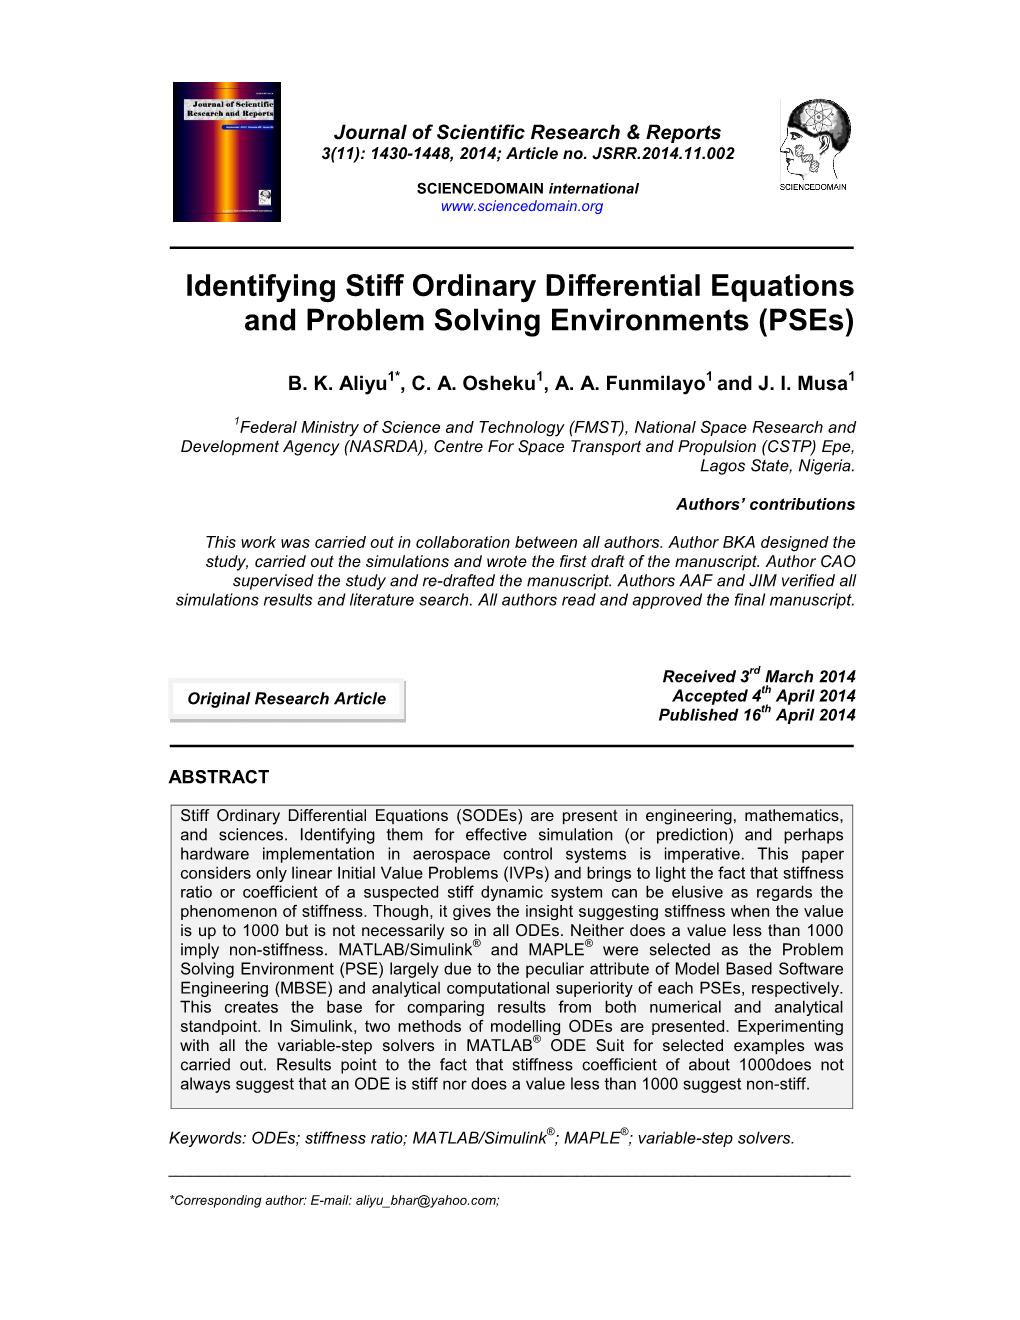 Identifying Stiff Ordinary Differential Equations and Problem Solving Environments (Pses)